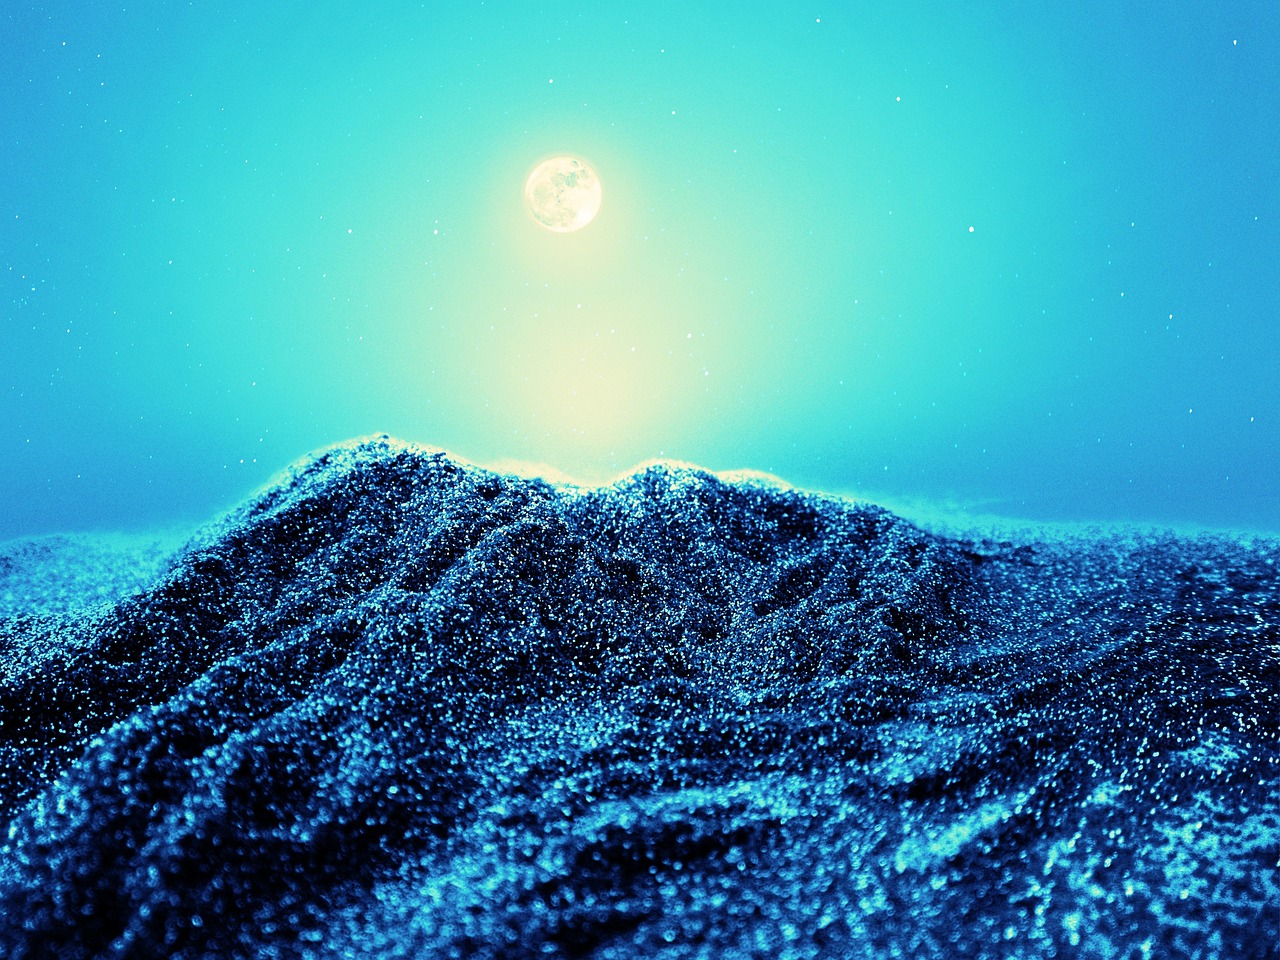 a snow covered mountain with a full moon in the sky, digital art, wave of water particles, blue bioluminescent plastics, full of sand and glitter, beautiful photo